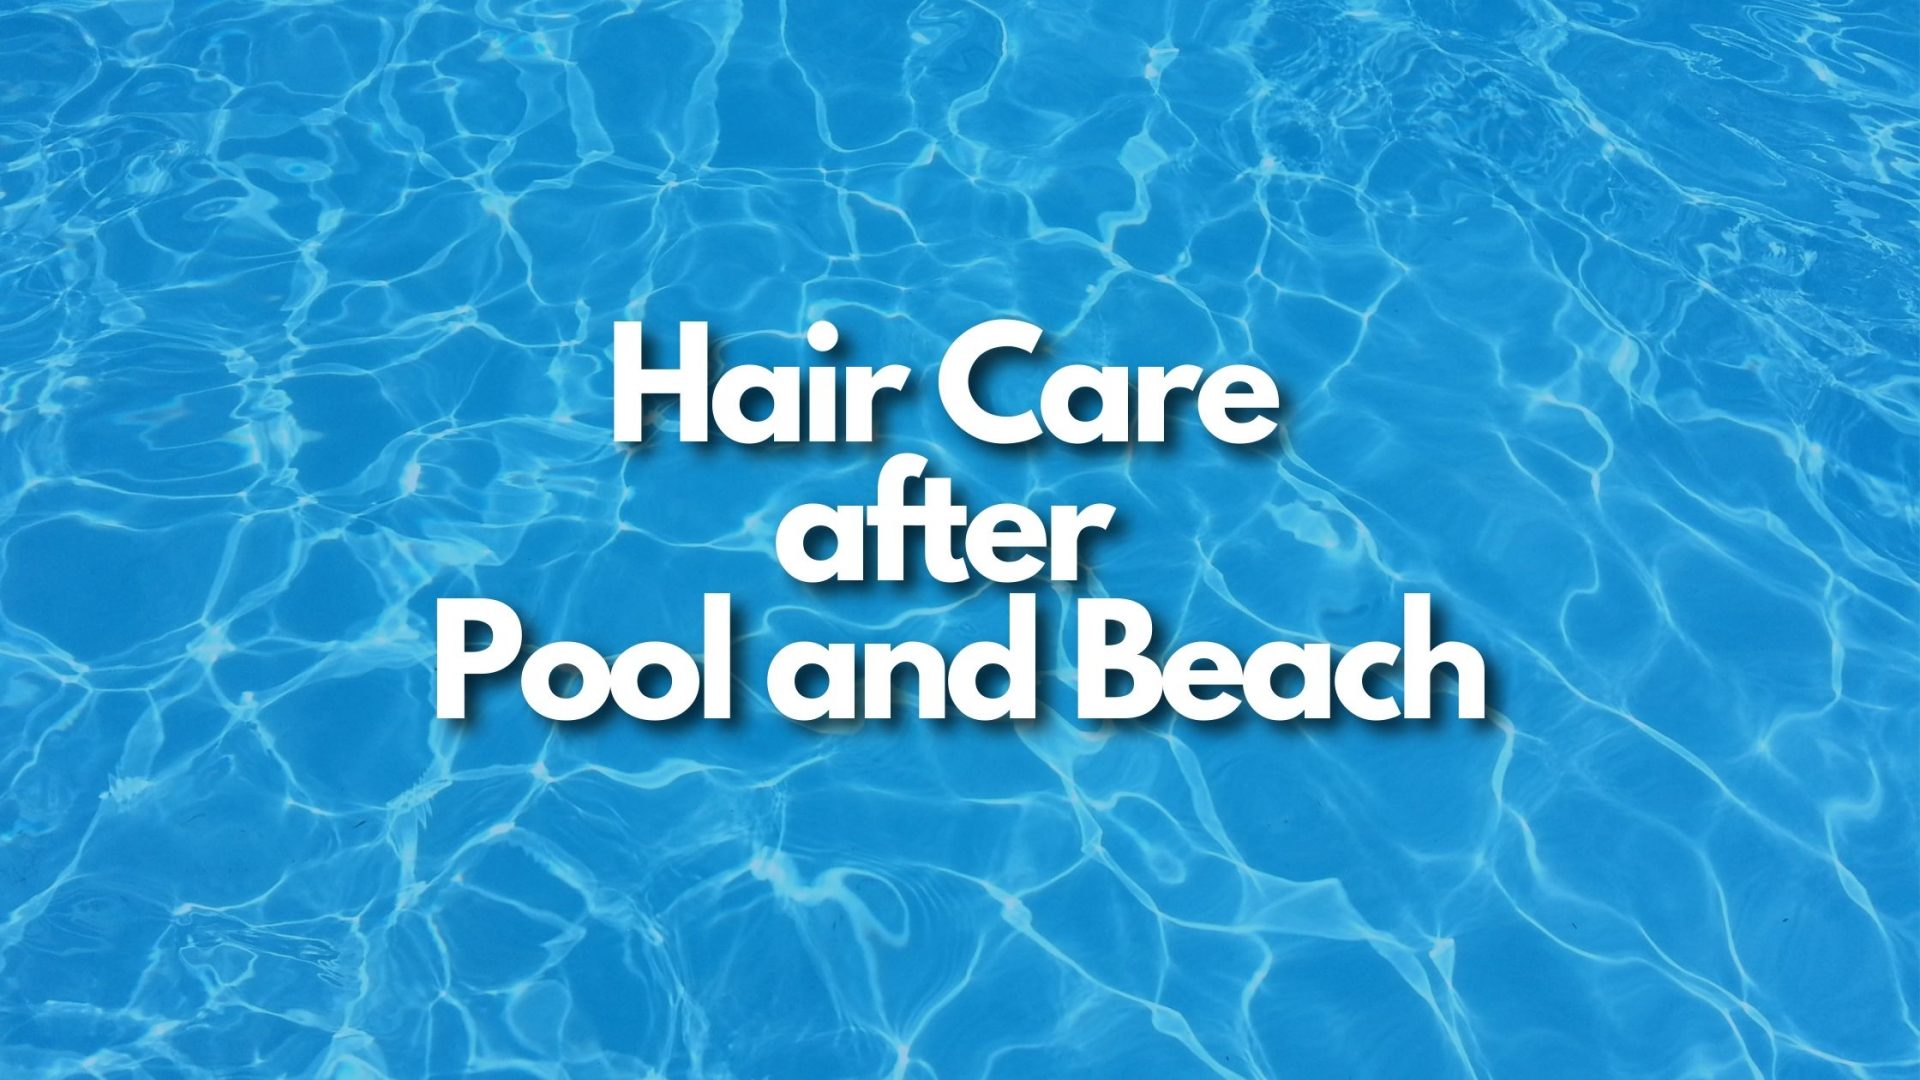 Chlorine Hair Treatments – How to do Hair Care After Pool and Beach?